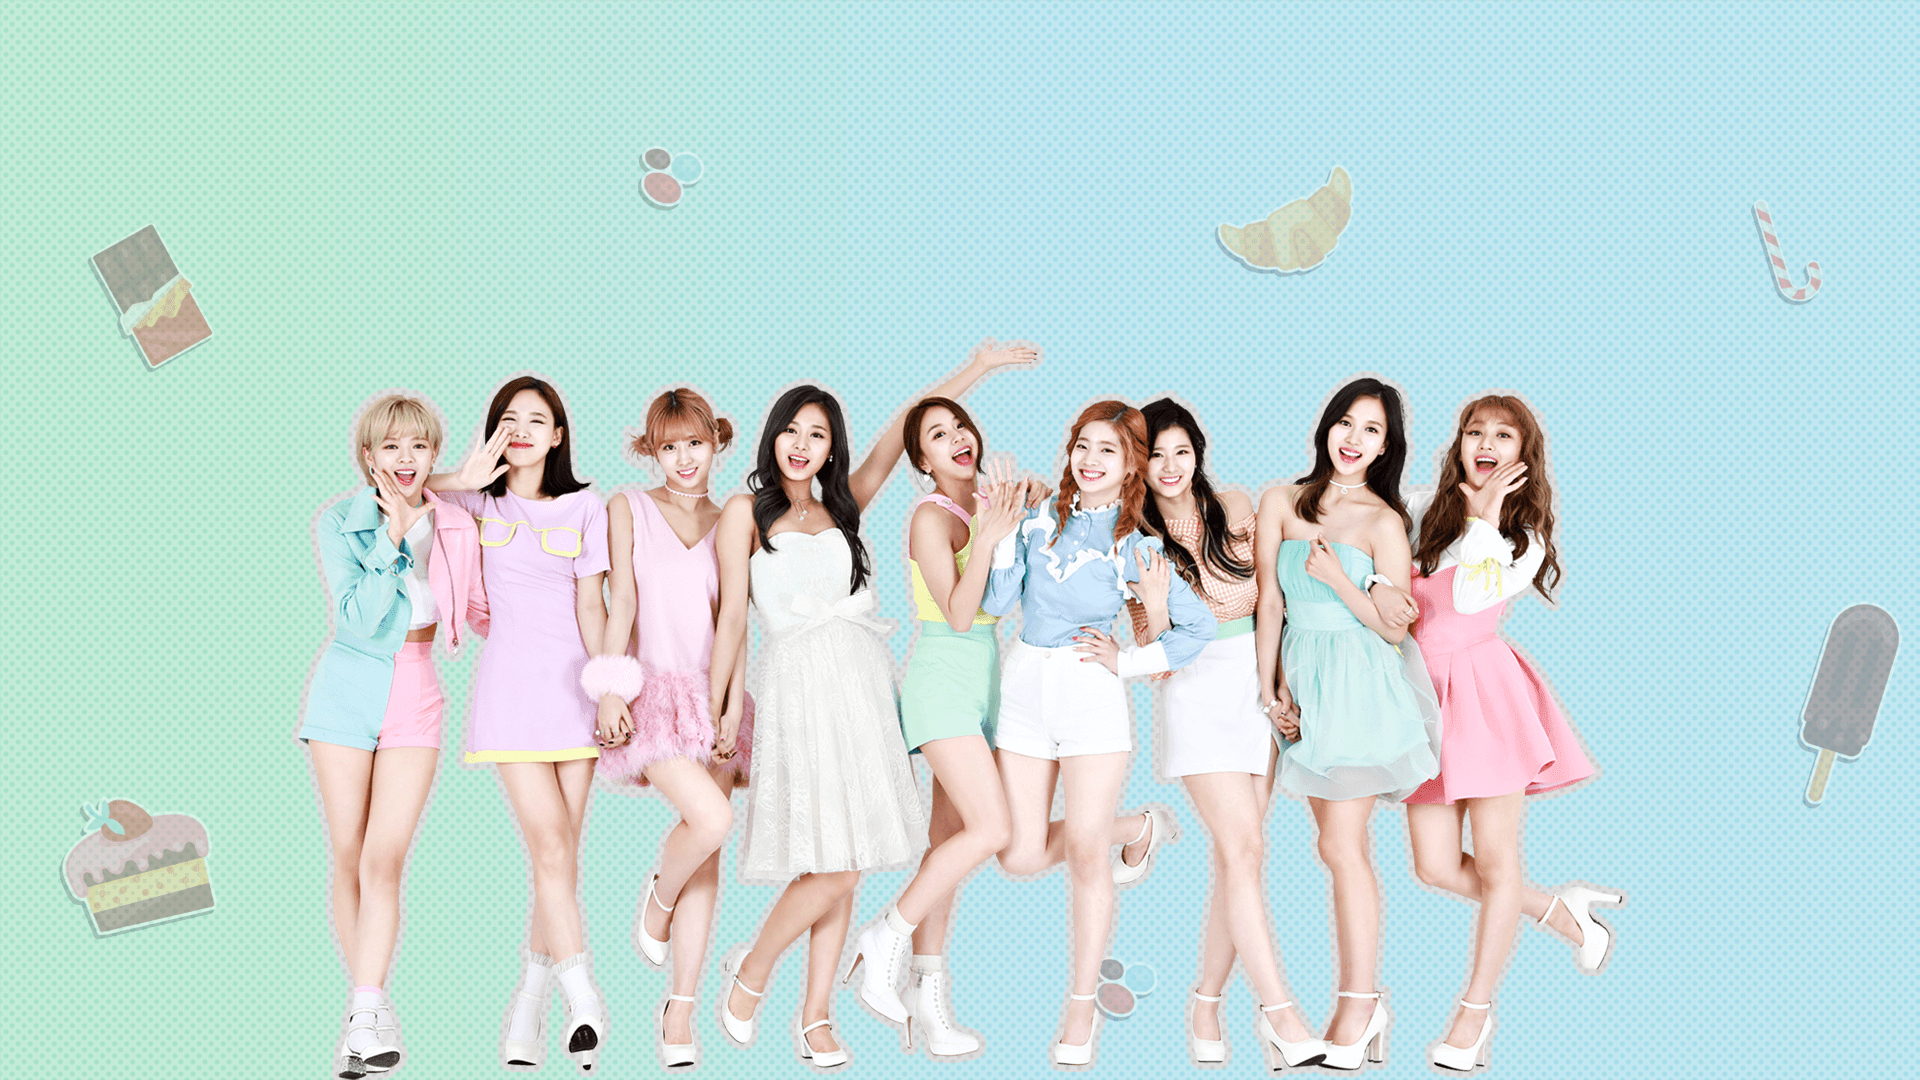 1920x1080 Twice PC Wallpapers